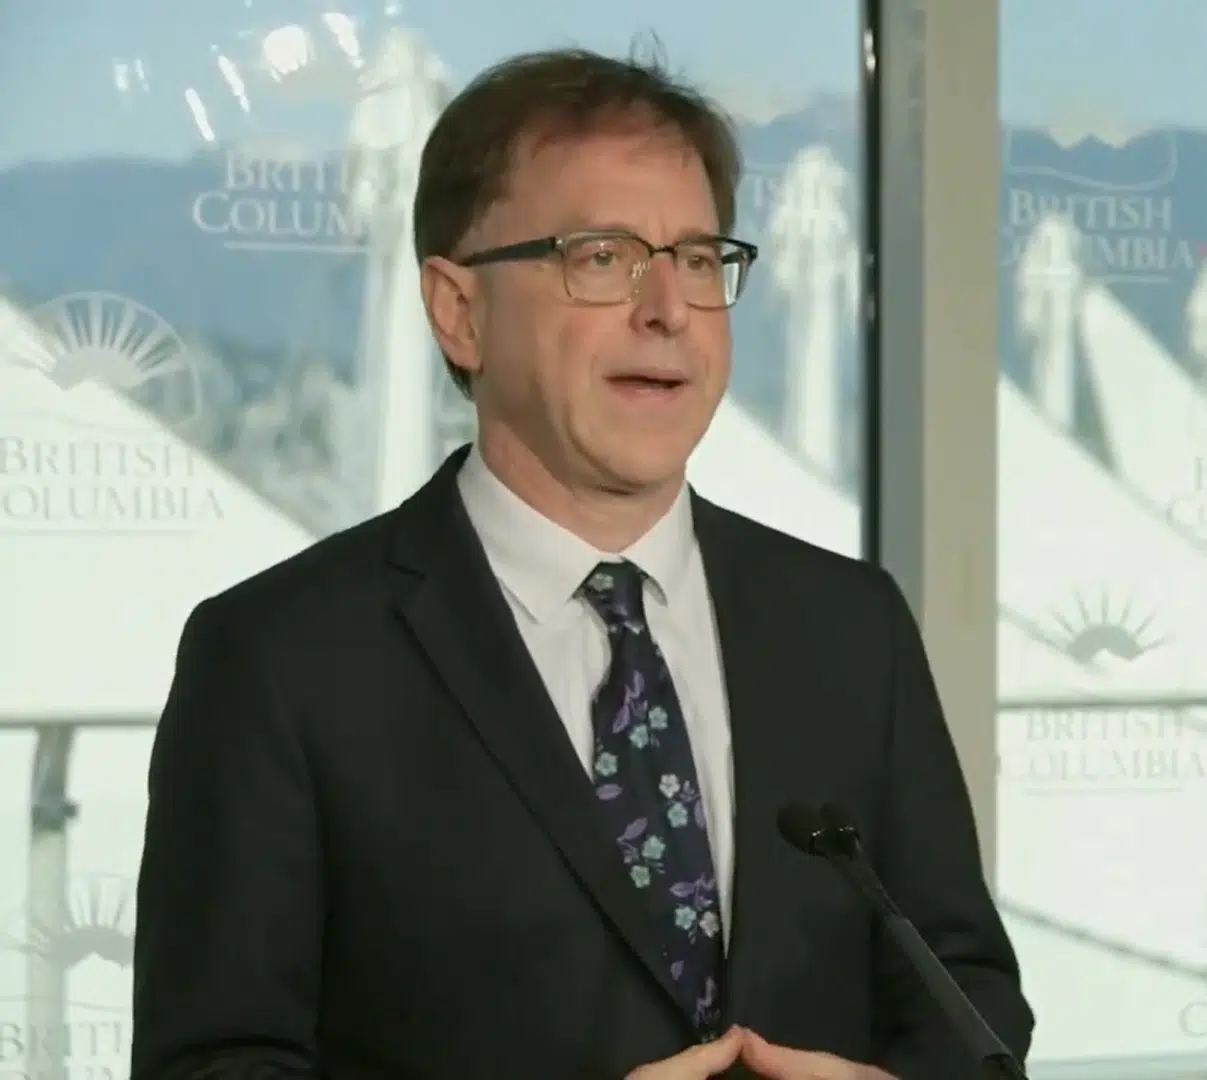 BC's Health Minister says all 501 health-care facilities have completed their single-site plan